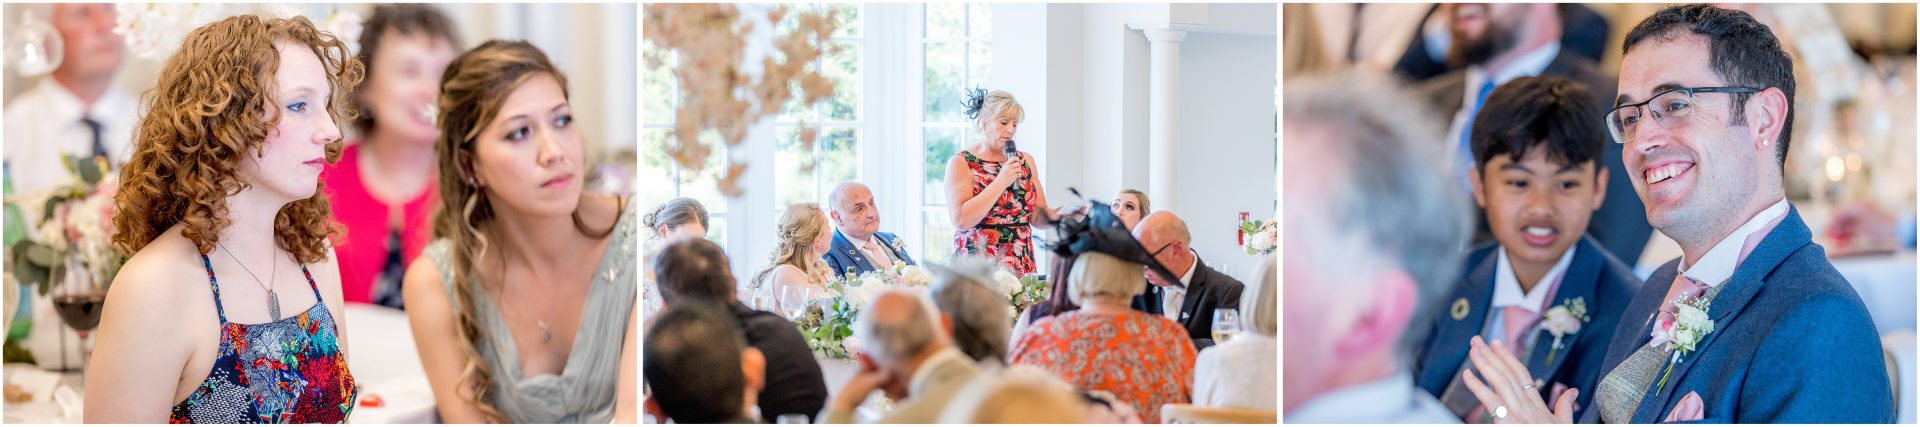 Colour photographs of wedding guests listening to the speeches